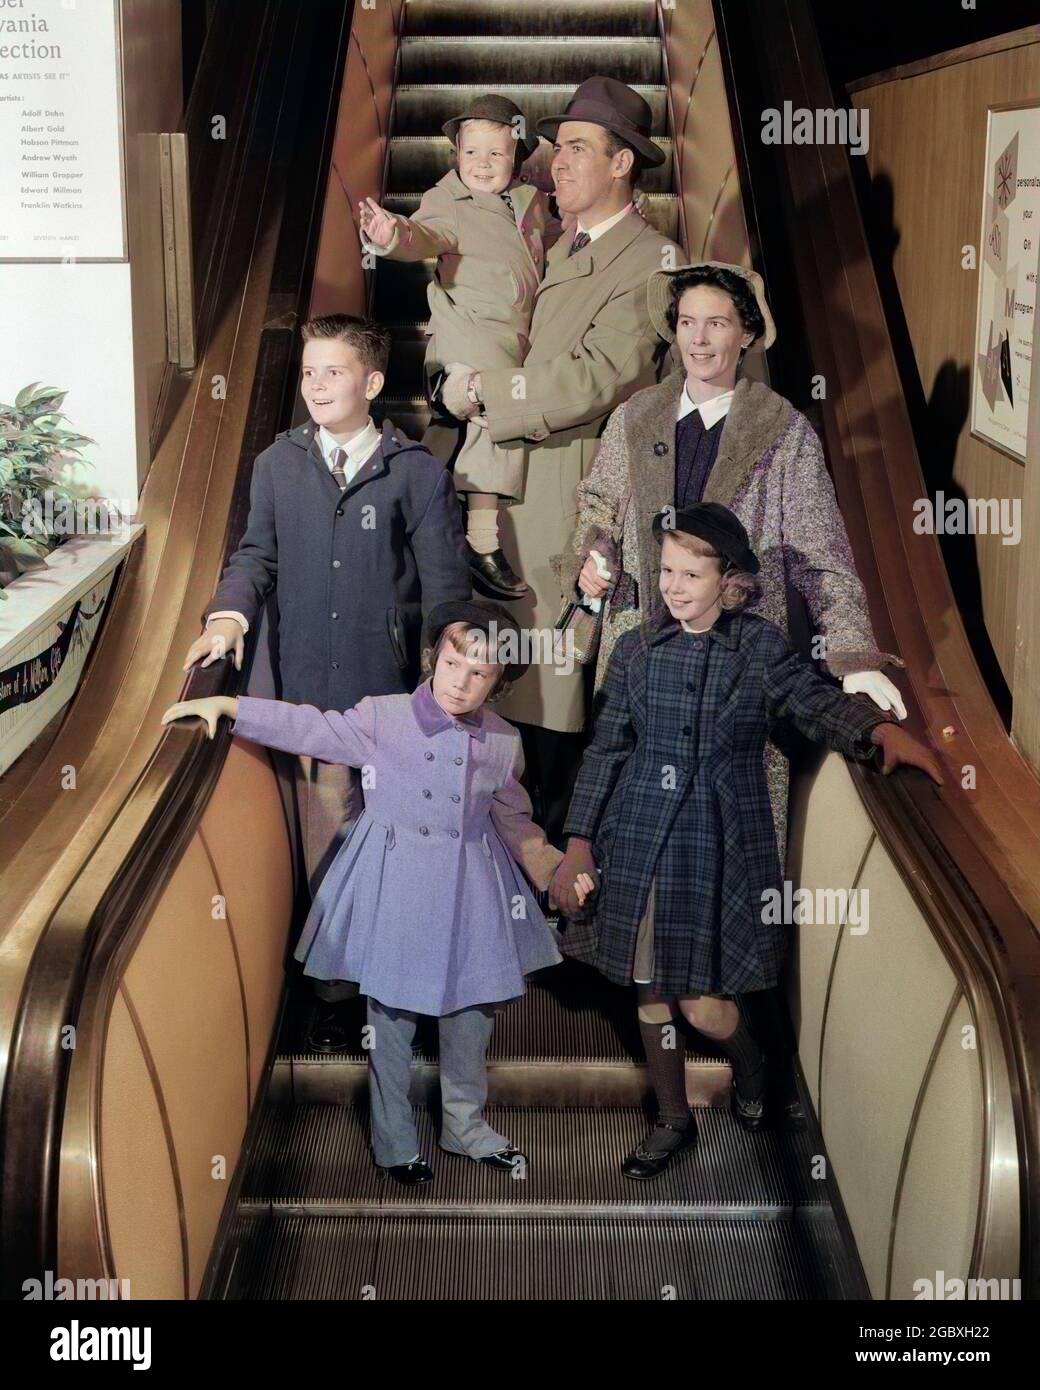 1950s SMILING FAMILY OF 6 IN WINTER COATS GOING DOWN STORE ESCALATOR - j7705c HAR001 HARS DOWN HUSBAND 3 DAD INDOOR RIDING MOM HATS INDOORS NOSTALGIC PAIR GOING COLOR RELATIONSHIP MOTHERS OLD TIME FIGURES NOSTALGIA BROTHER MOVING OLD FASHION SISTER 1 STAIRS JUVENILE RIDE SONS FAMILIES LIFESTYLE GROWNUPS PARENTING FEMALES BROTHERS RELATION SPOUSE HUSBANDS GROWNUP COATS HEALTHINESS 6 FULL-LENGTH LADIES DAUGHTERS PERSONS GROWN-UP MALES SIX PAIRS MECHANICAL SIBLINGS SISTERS FATHERS MEN AND WOMEN PATERNAL PRETEEN BOY RIDER SPOUSES FATHERHOOD MATERNAL HAPPINESS RIDERS DADS IN OF PRETEEN Stock Photo